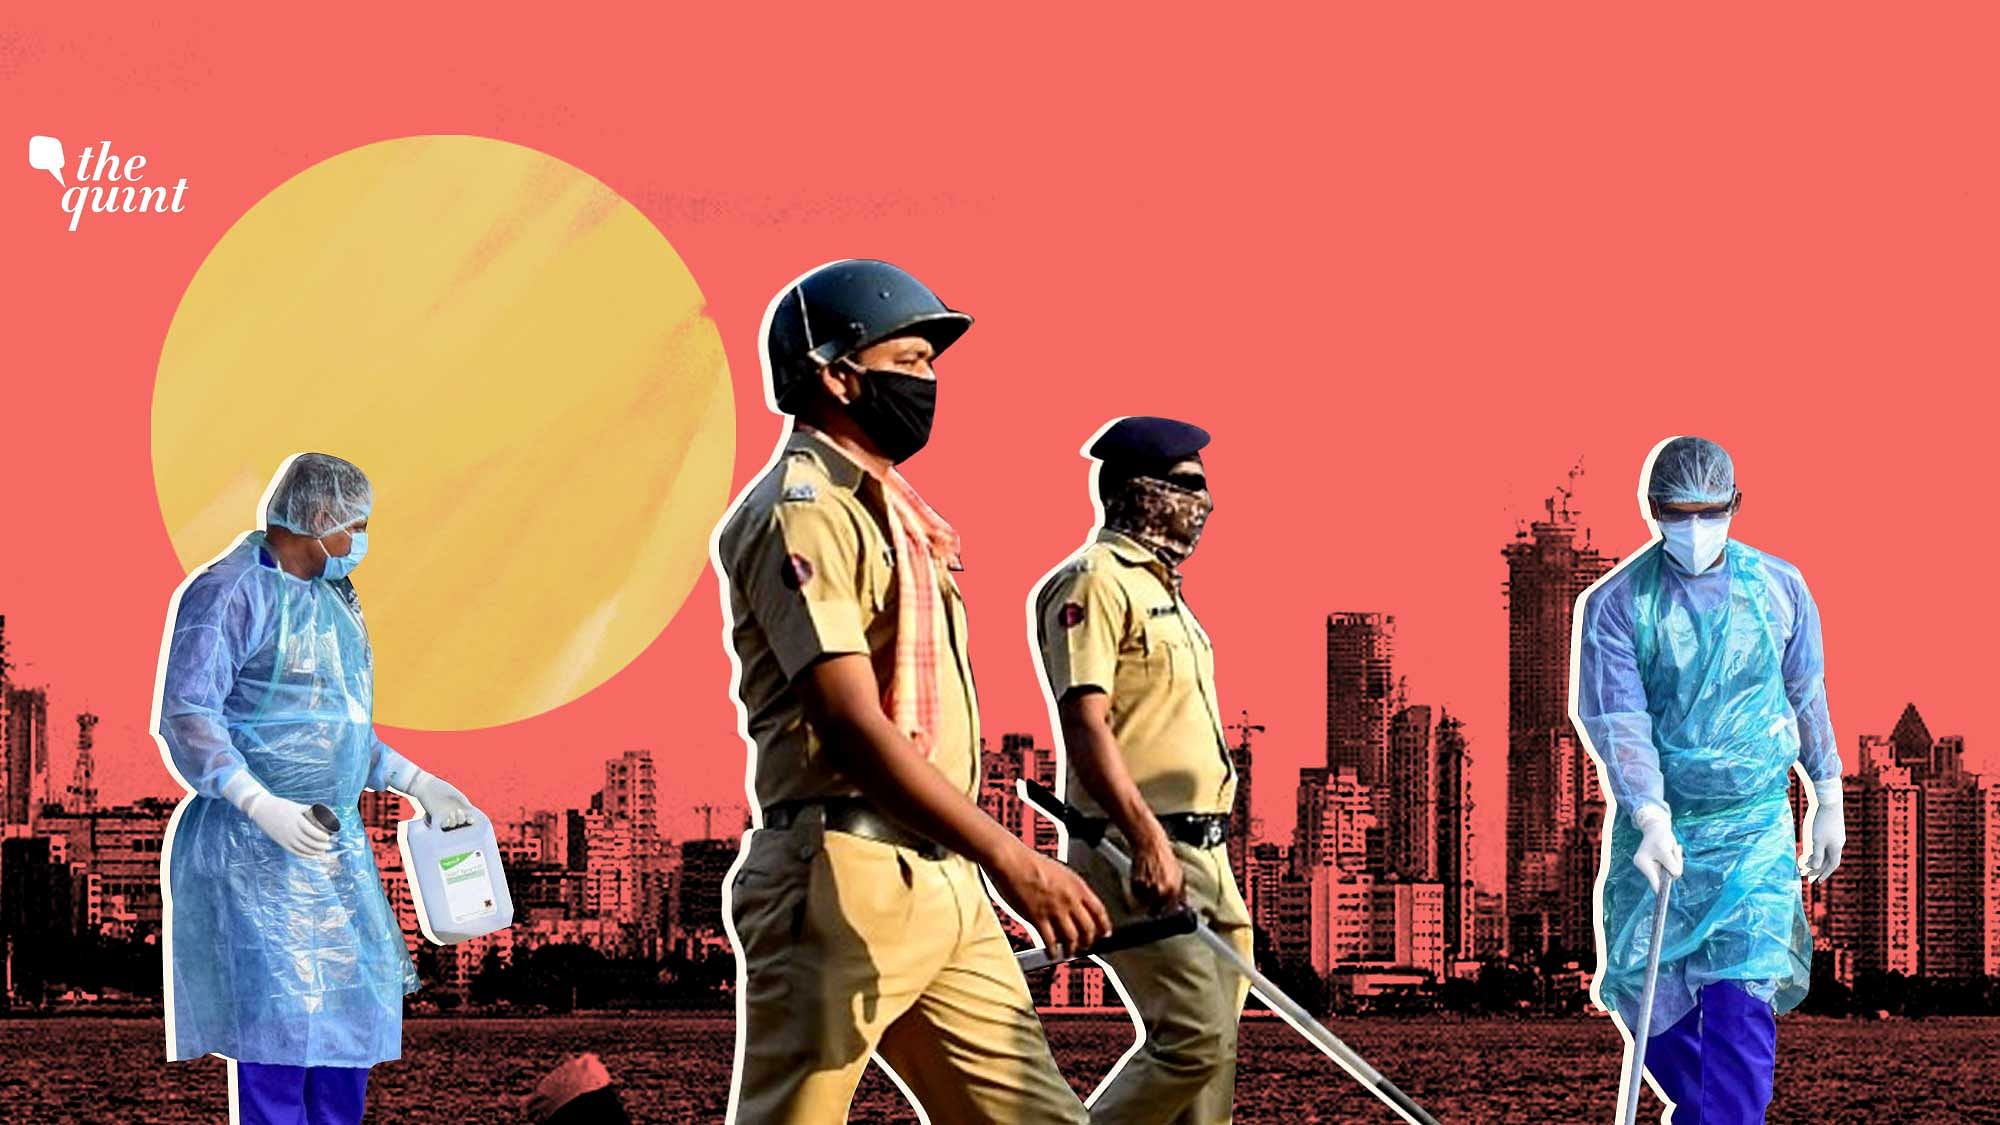 Mumbai health and civic experts analyse what lies ahead for the city.